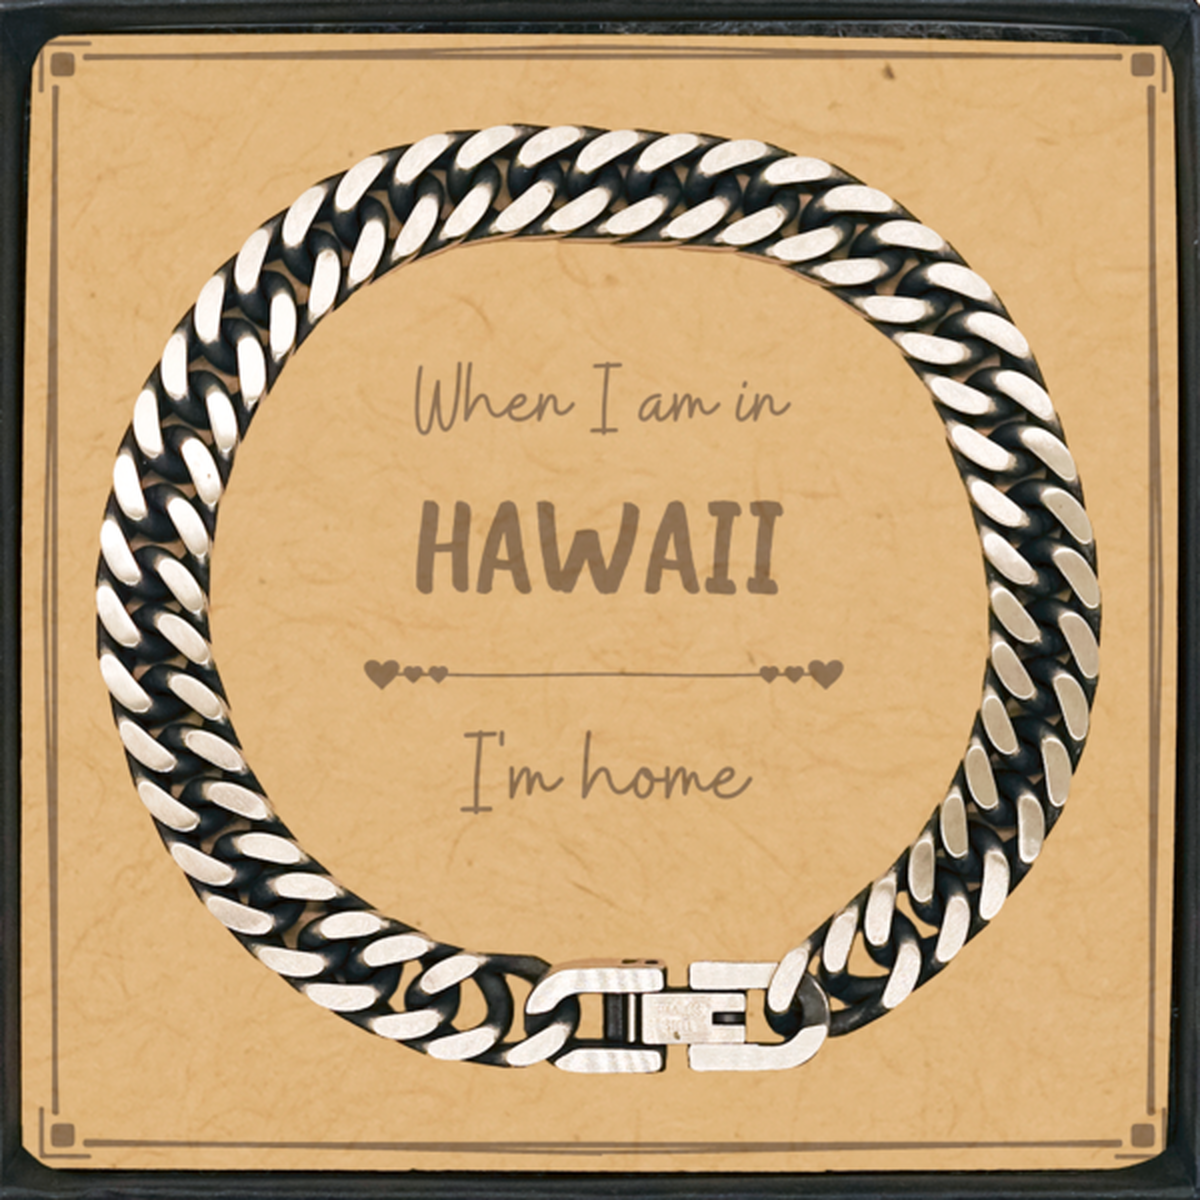 When I am in Hawaii I'm home Cuban Link Chain Bracelet, Message Card Gifts For Hawaii, State Hawaii Birthday Gifts for Friends Coworker